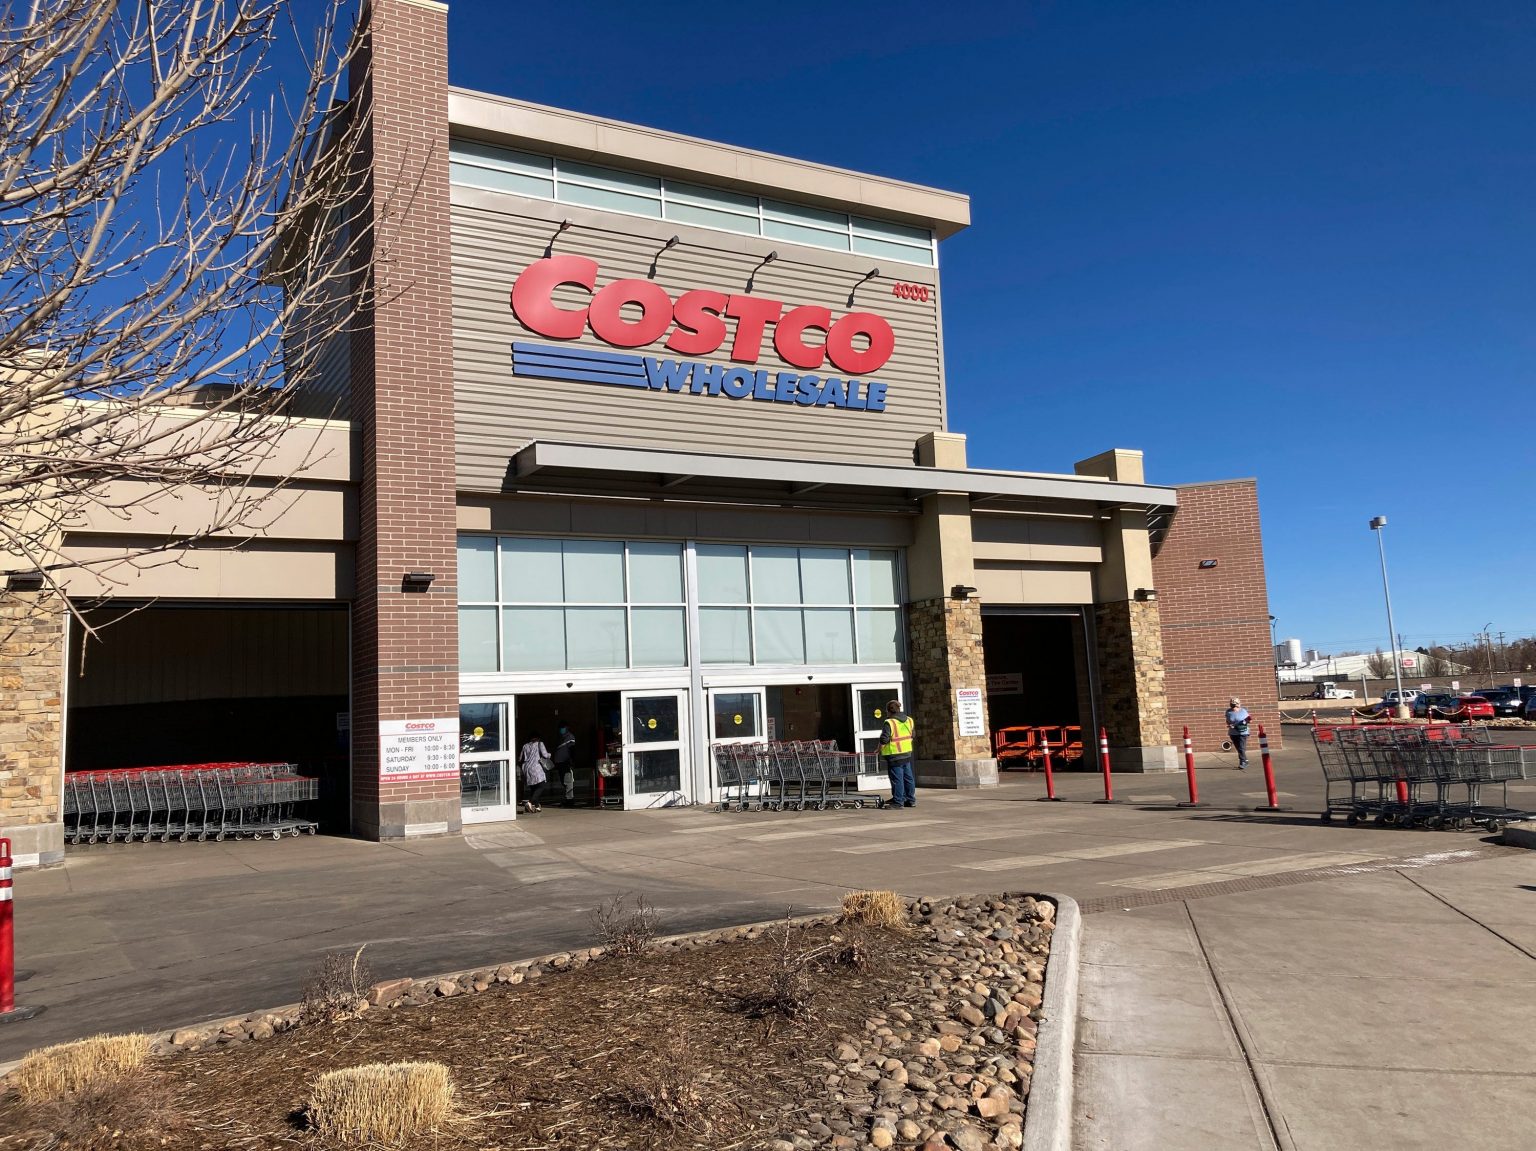 Costco is opening 11 new locations through November – see the full list